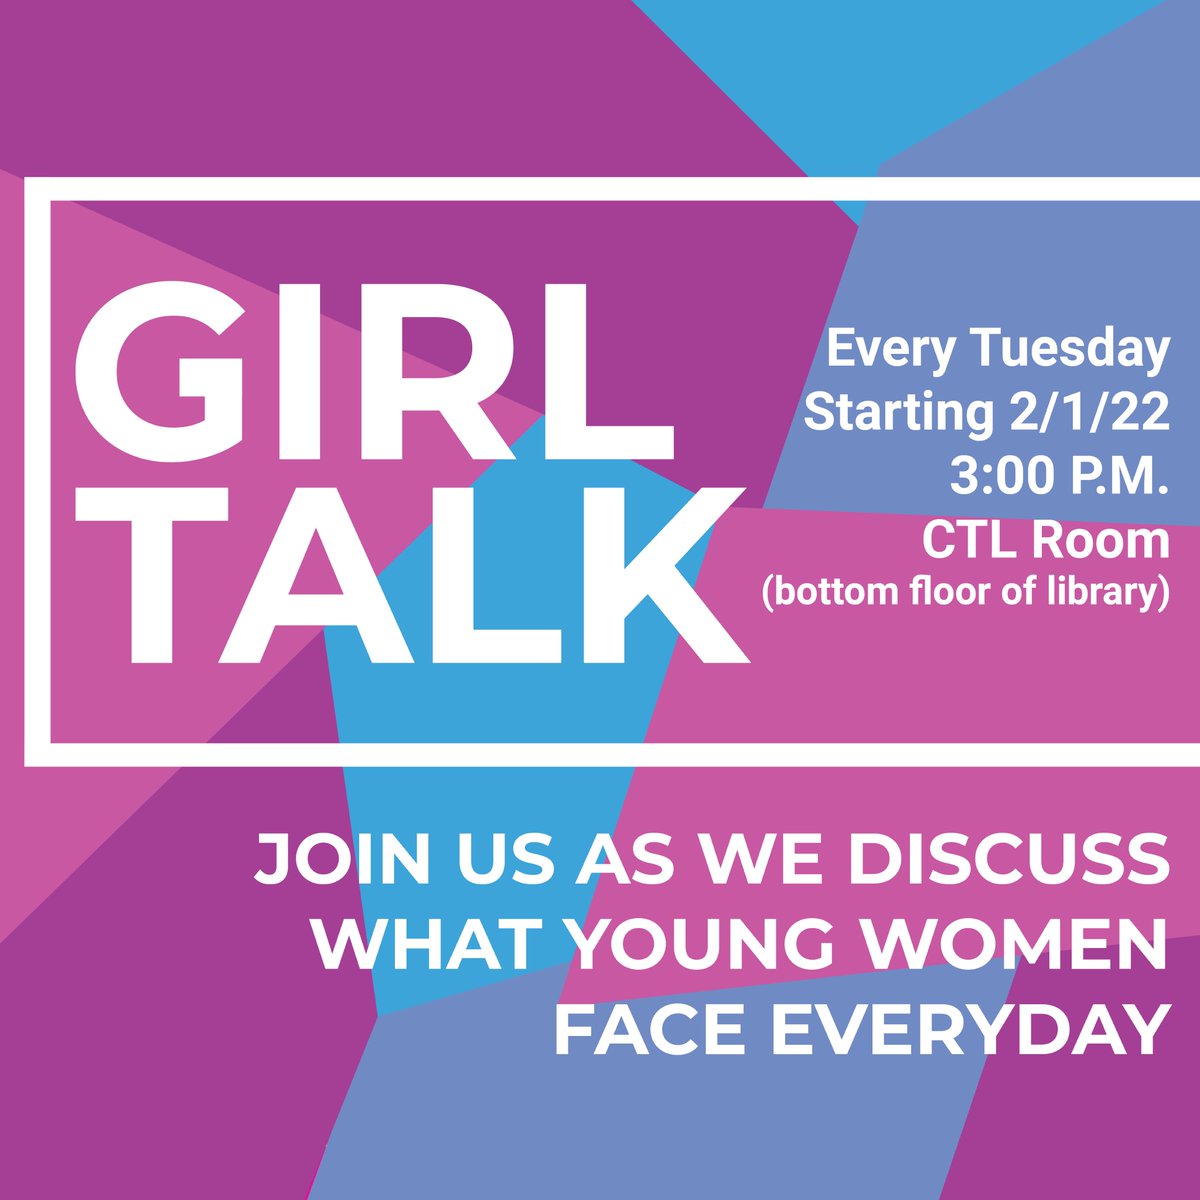 Come join the campus discussion series “Girl Talk,” sponsored by the Hinds CC Mental Health Services. Every Tuesday, Jenny Crutchfield and Janella John will be discussing honest topics that young women encounter daily. 
Center for Teaching and Learning 
Feb. 1 at 3 p.m.
#hindscc https://t.co/Y3dR3wU17r